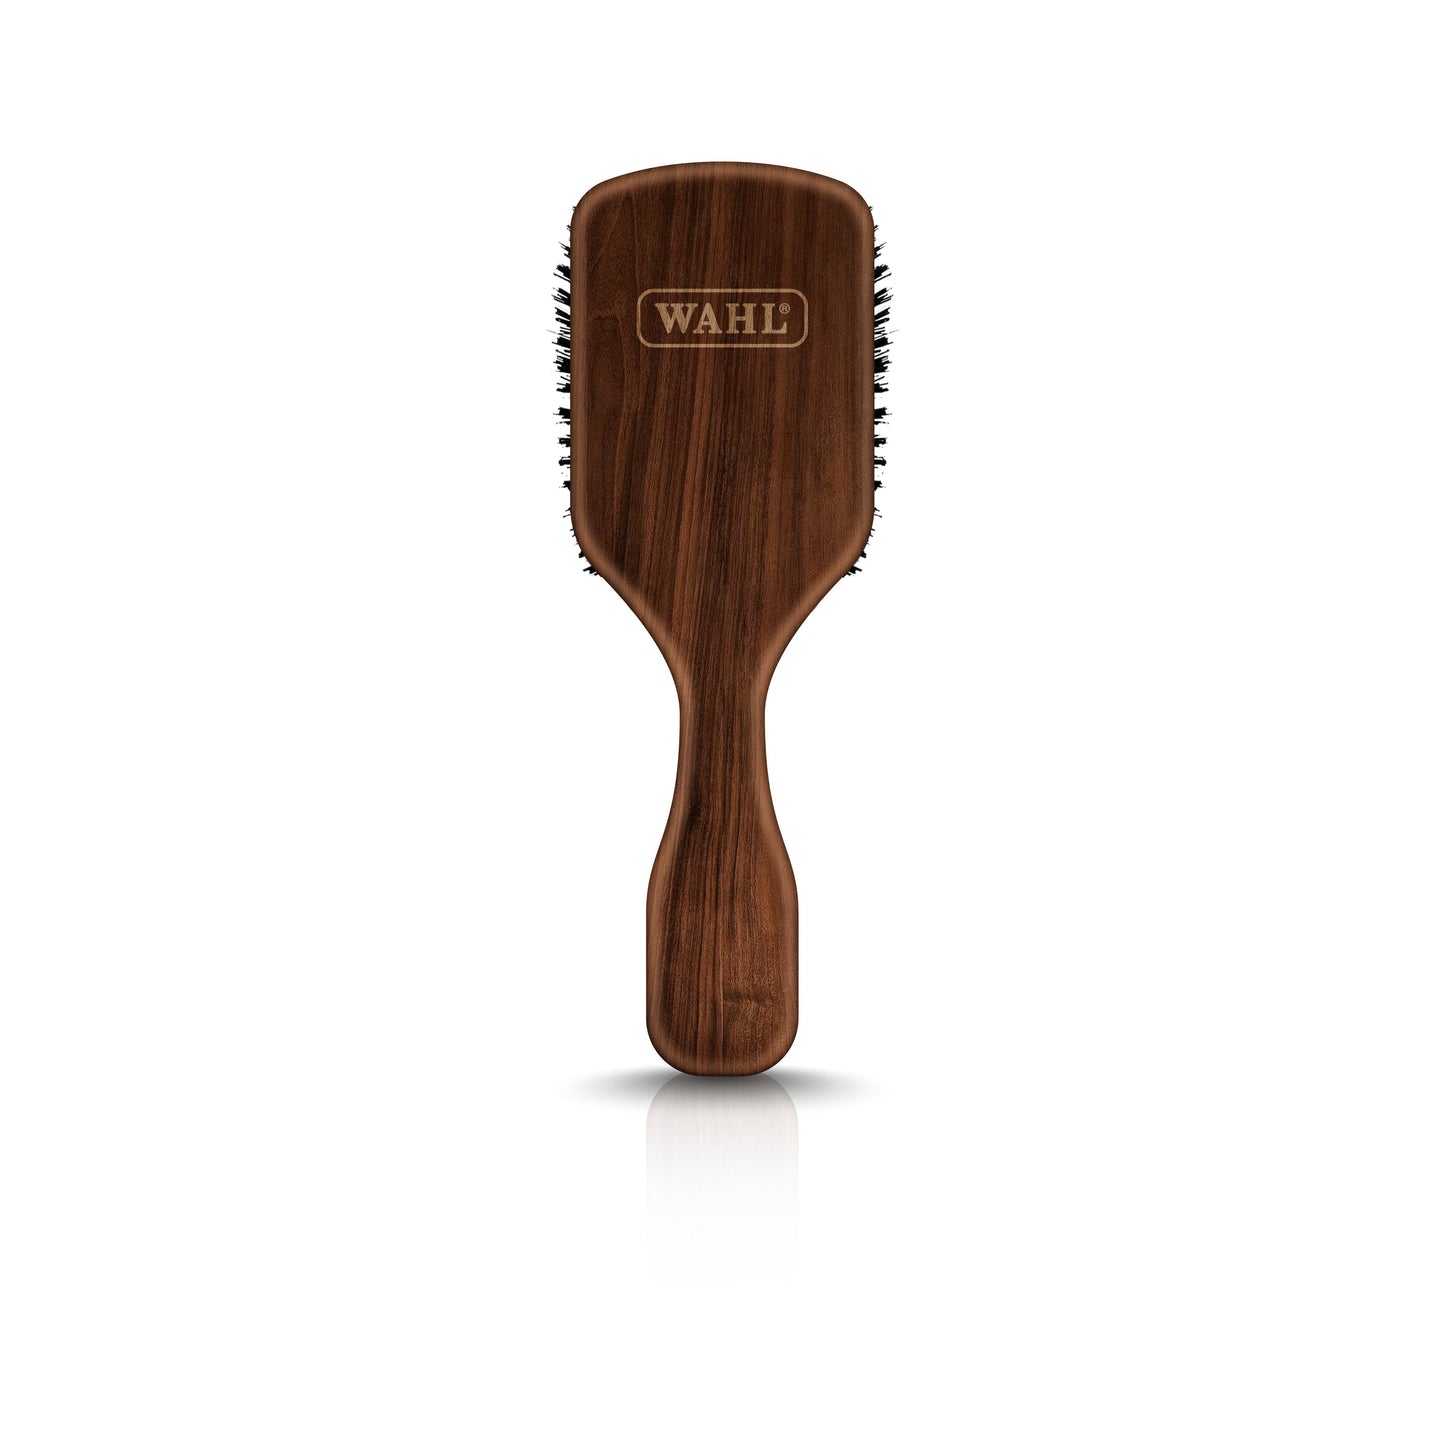 Wahl Wooden Fade/club Brush